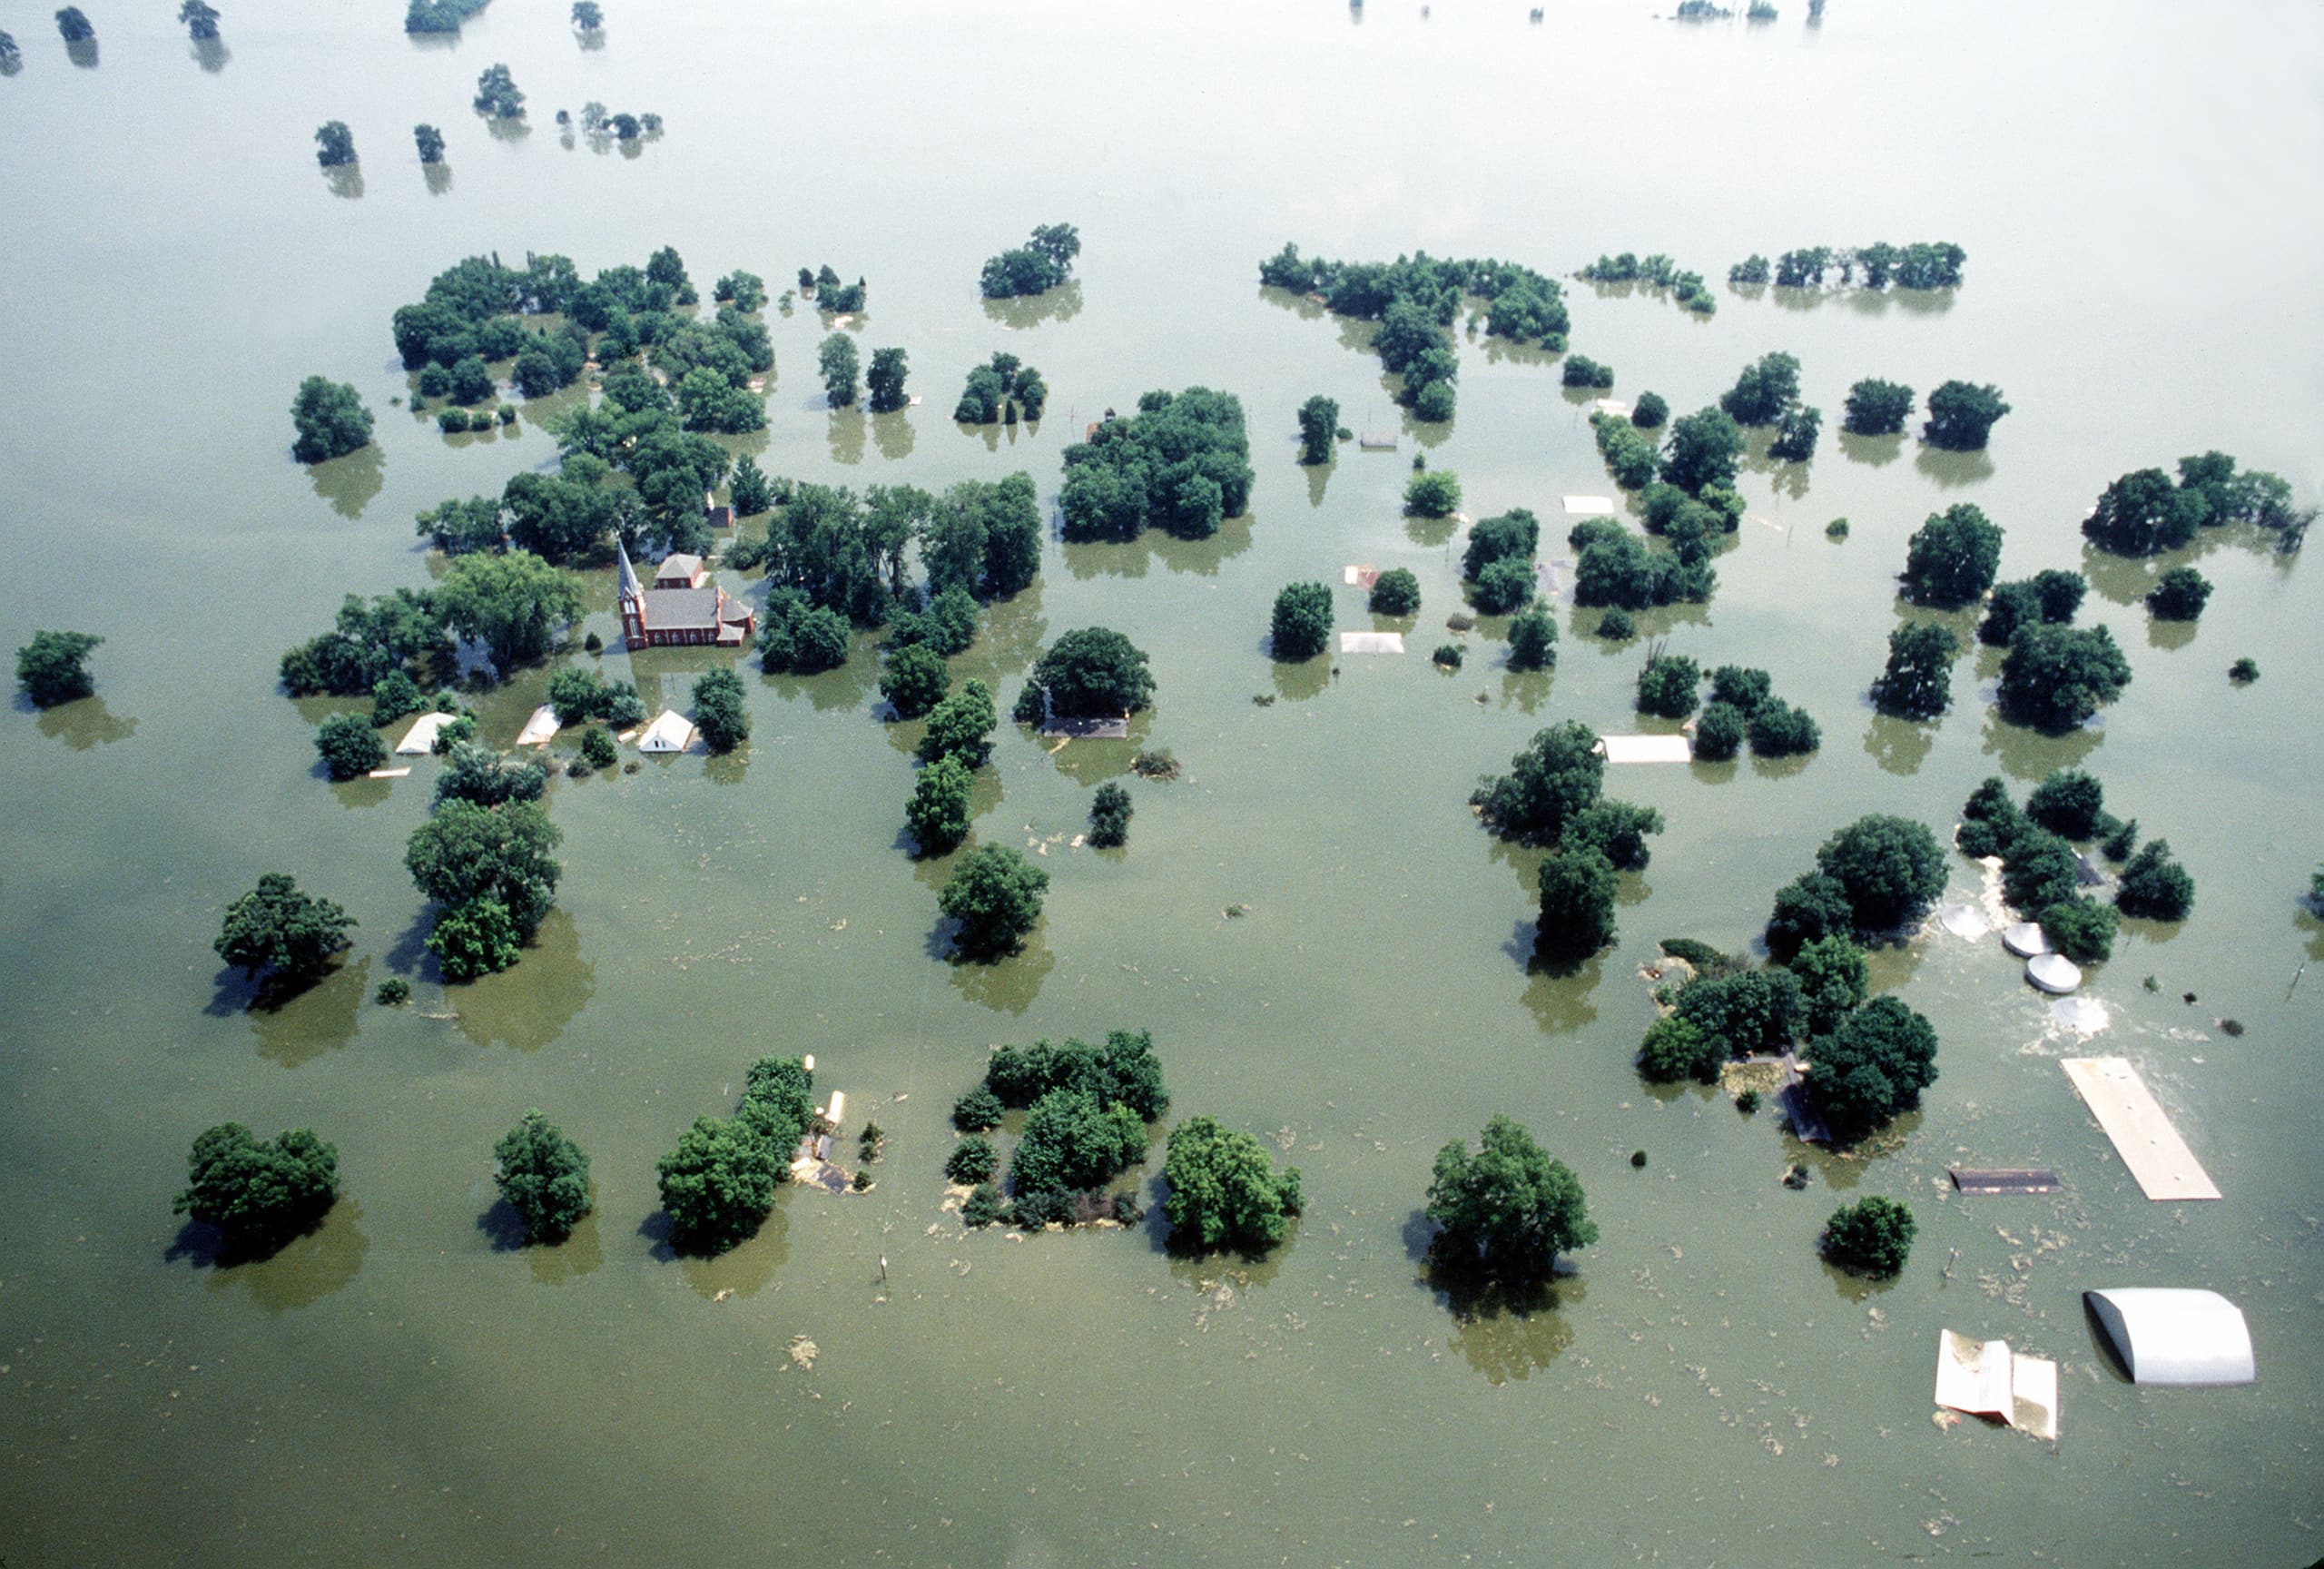 Mississippi River at Kaskaskia, Illinois during the Great Flood of 1993.